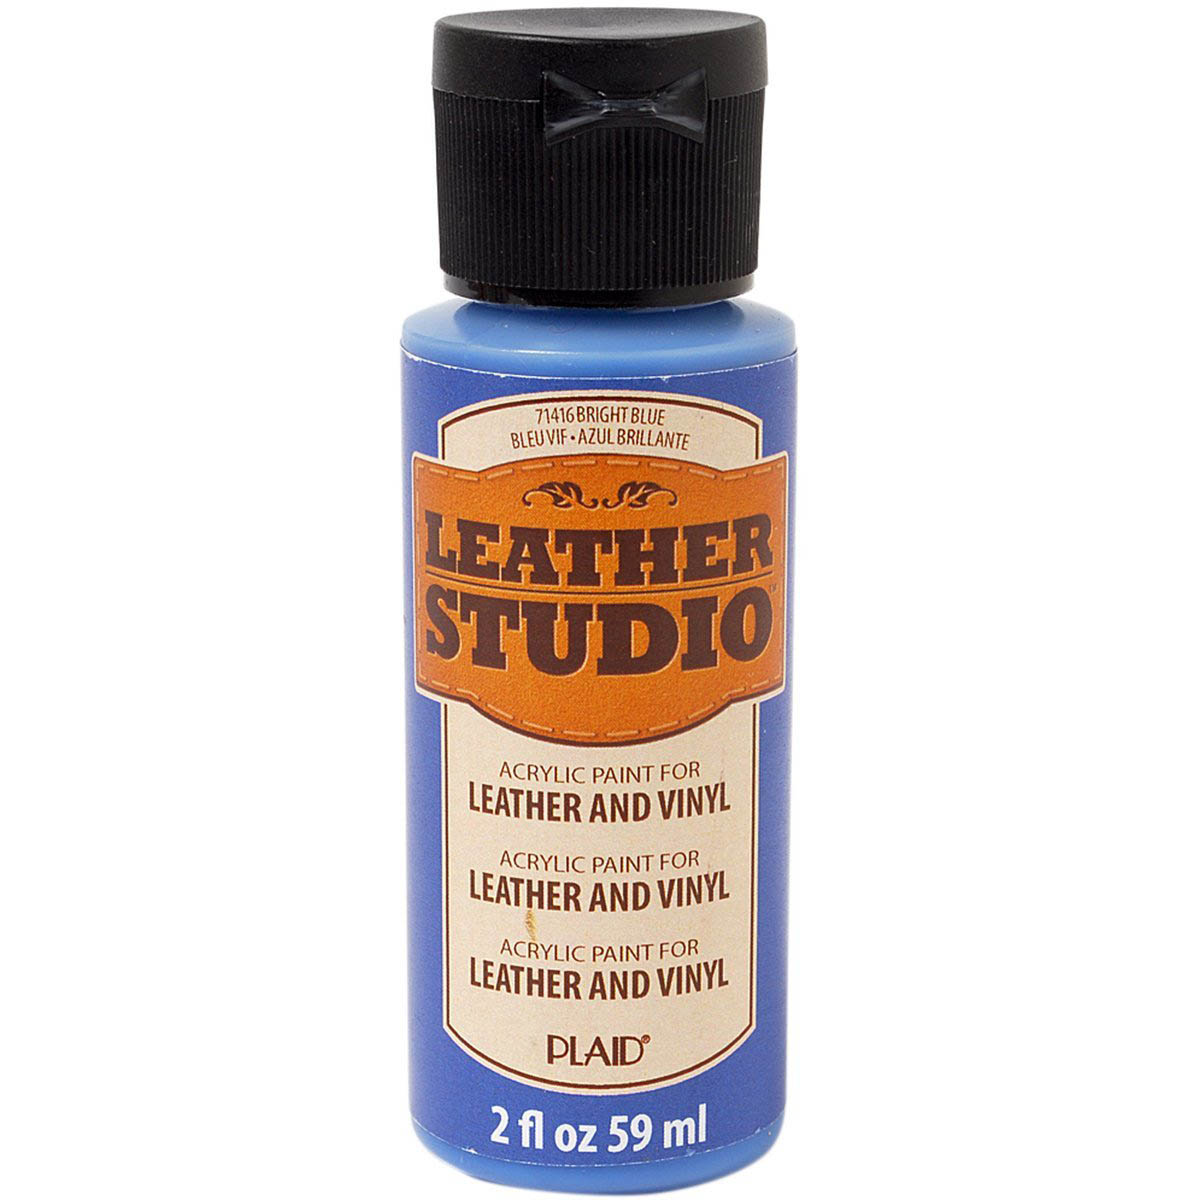 Buy Leather Touch Up Dye online